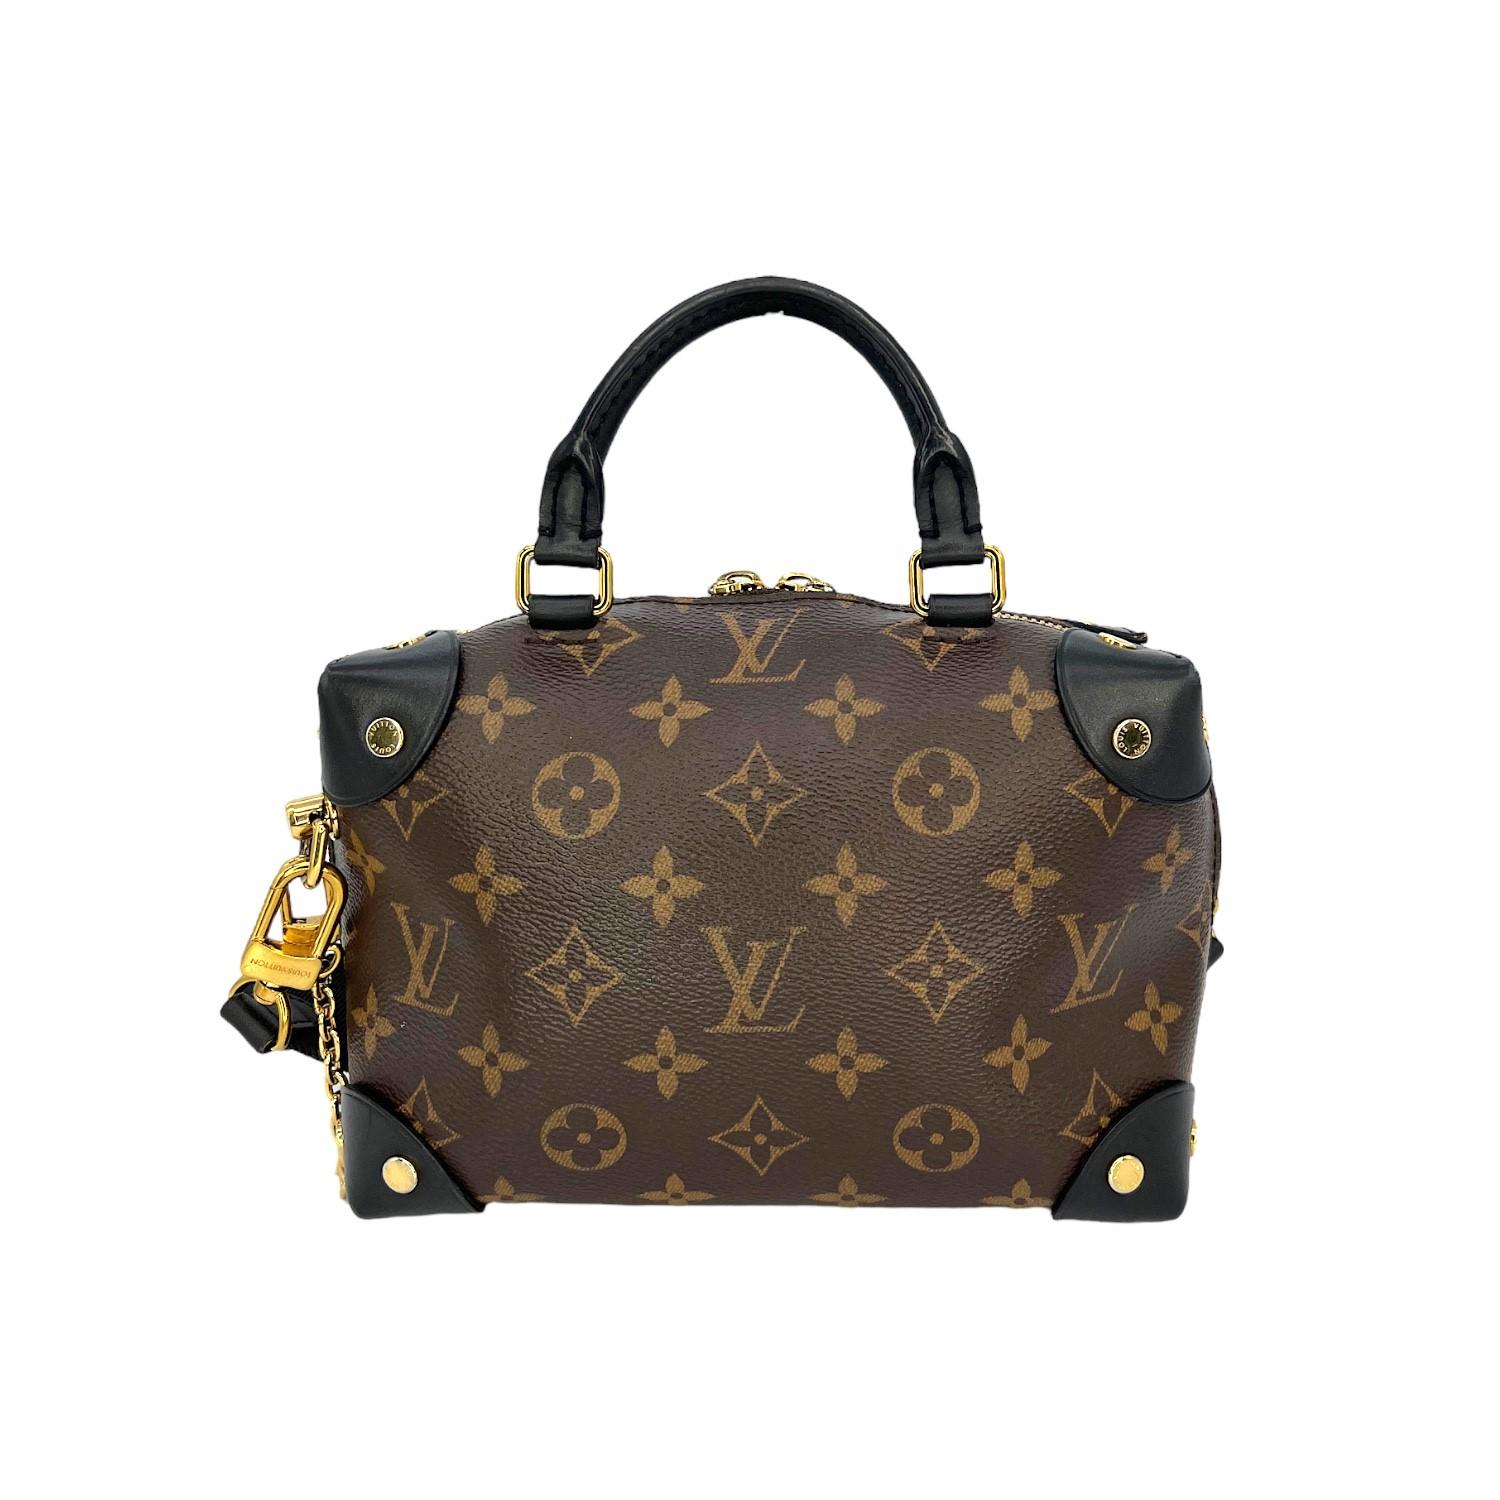 This Louis Vuitton Monogram Petite Malle Souple was made in France and it is finely crafted of the iconic Louis Vuitton Monogram coated canvas exterior with leather trimming and gold-tone hardware features. It has a rolled leather top handle. It has